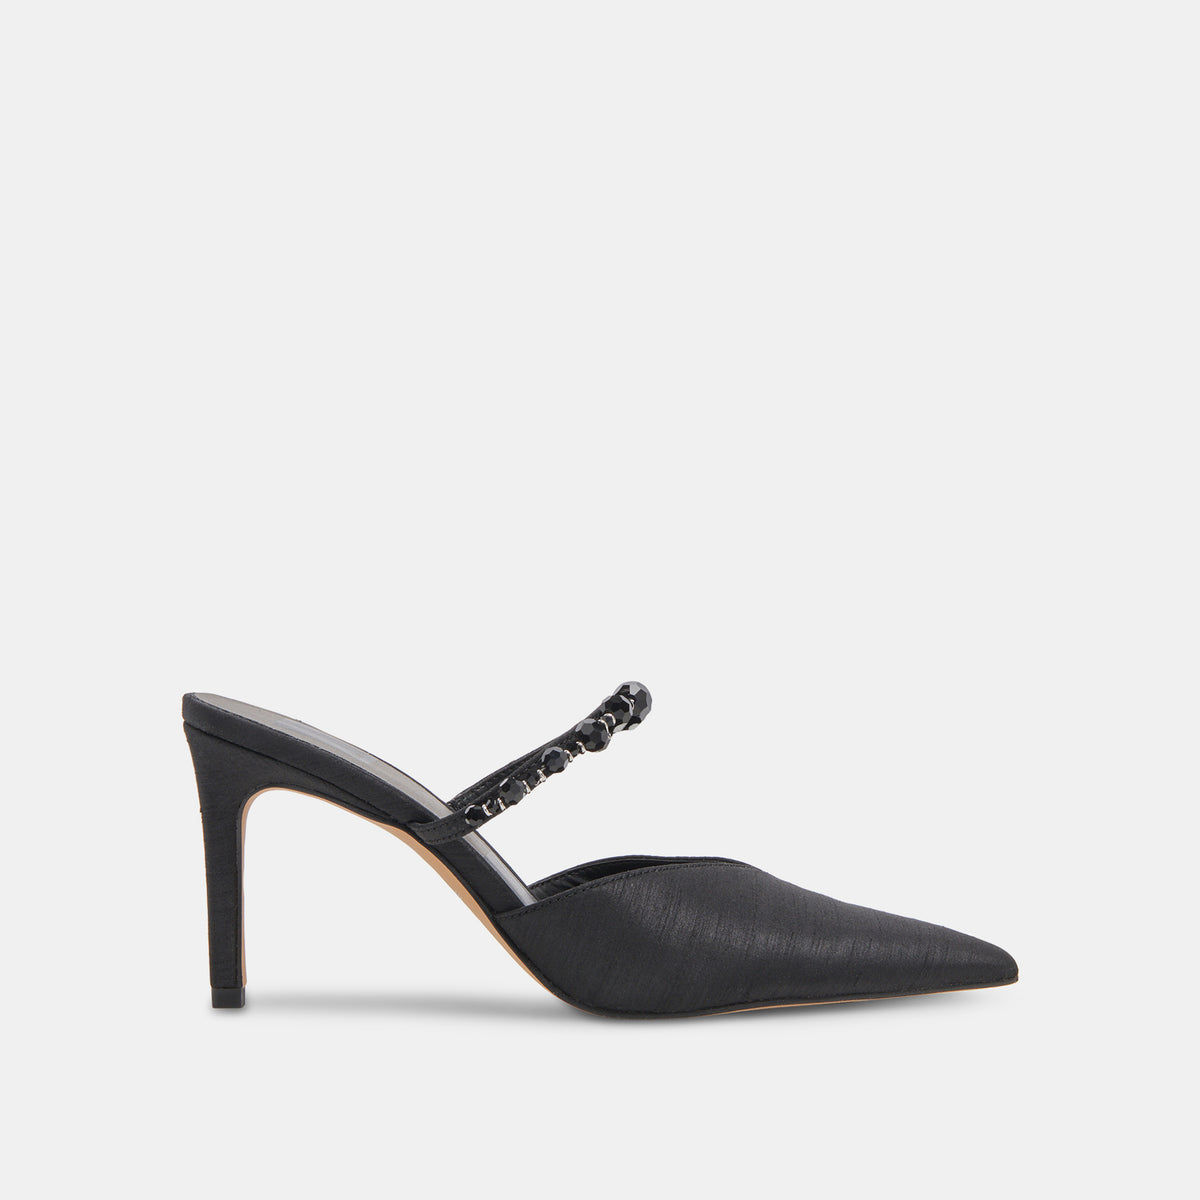 KANIKA Heels With Black Pearls | Thin Tapered Heel & Pointed Toe ...